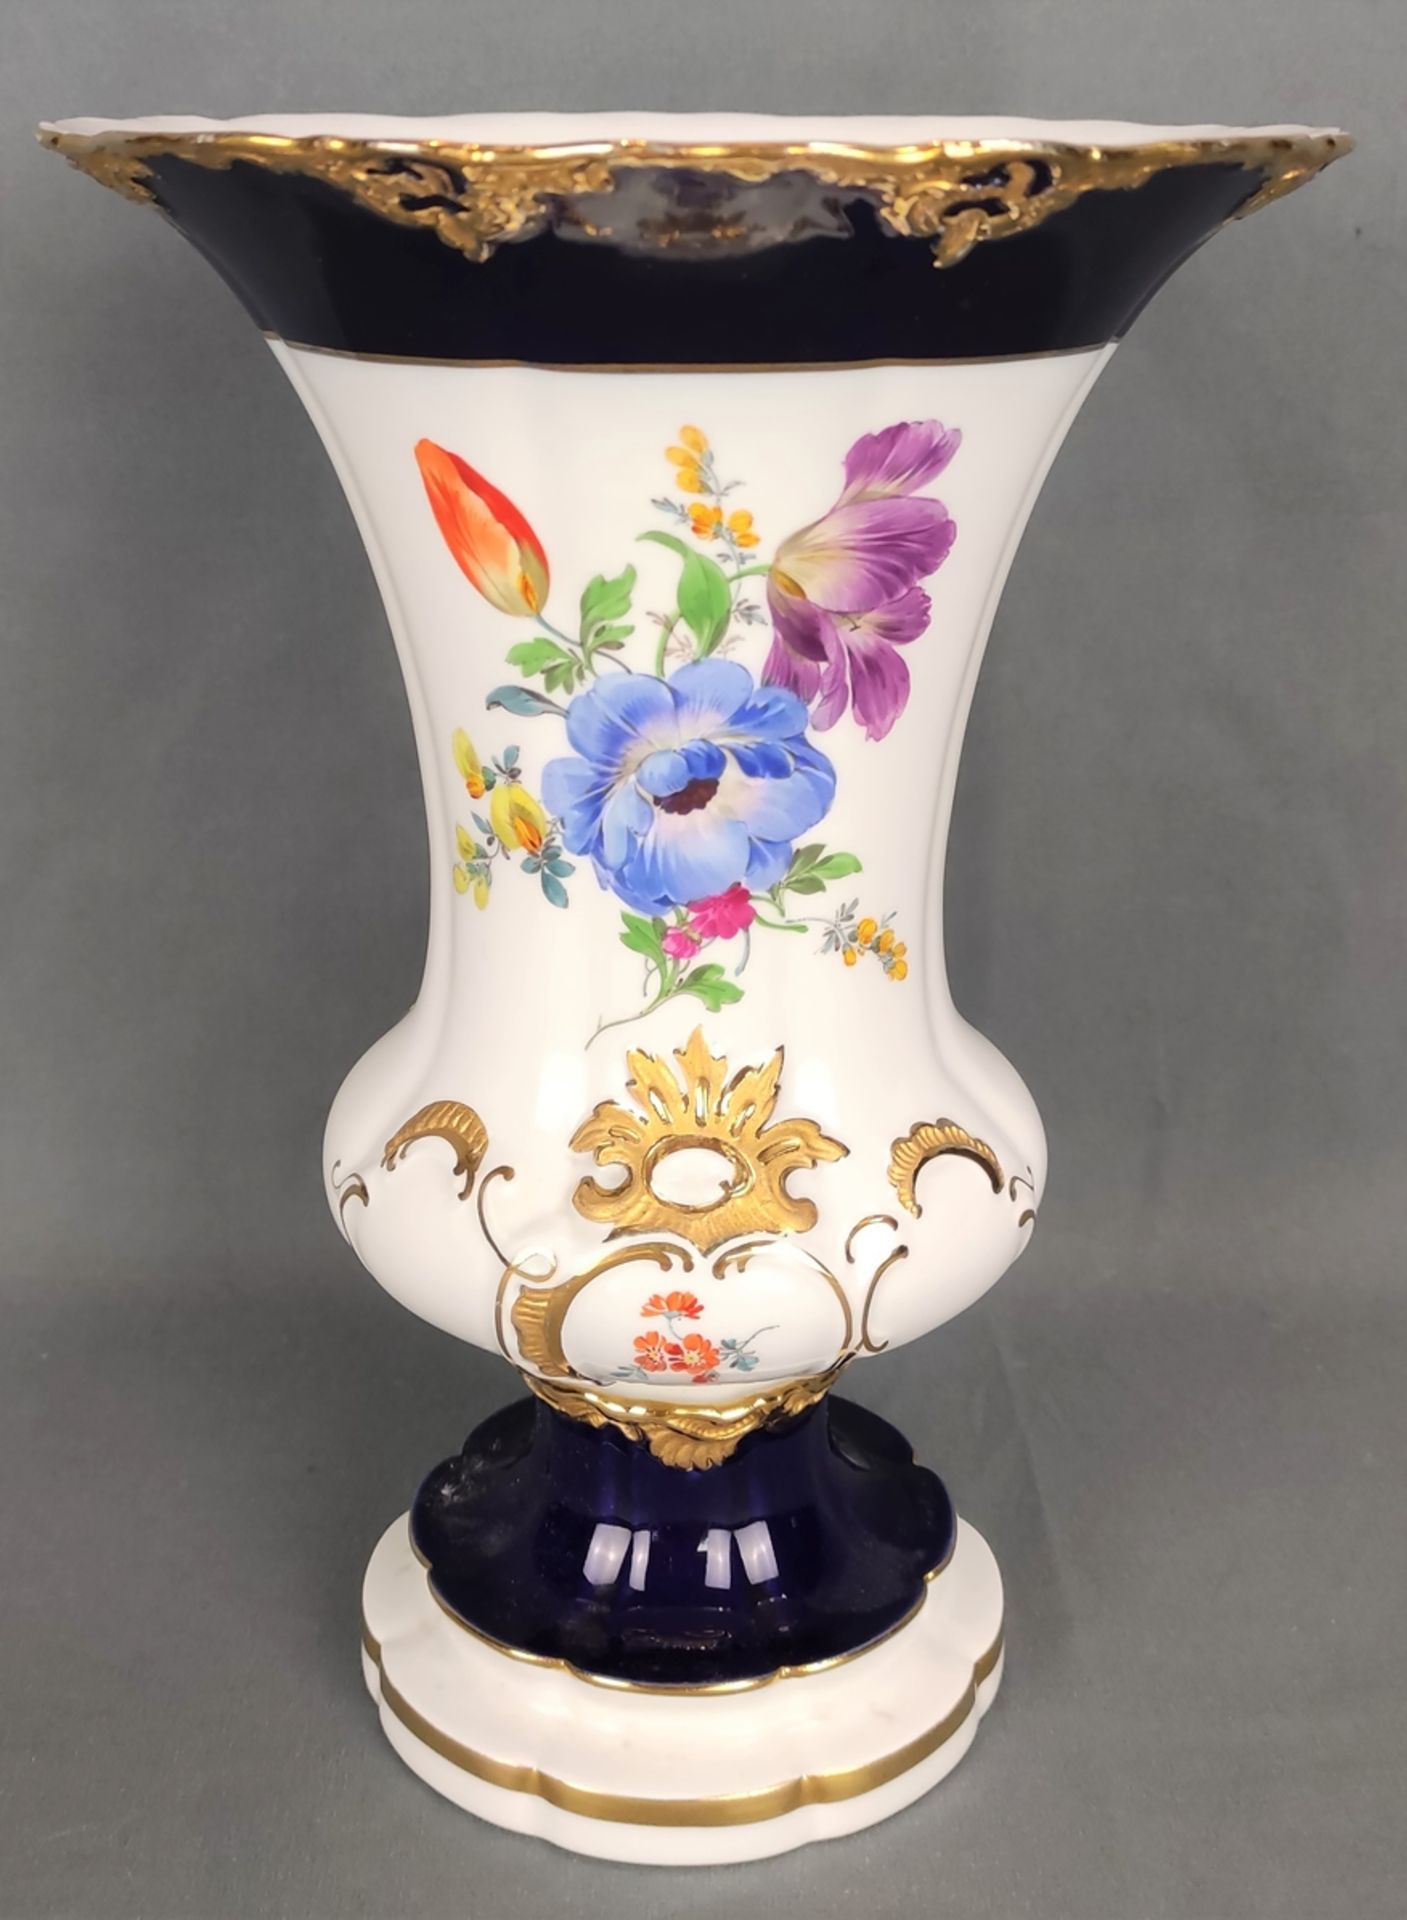 Decorative vase, elaborately polychrome painted with floral motifs, cobalt blue background and rich